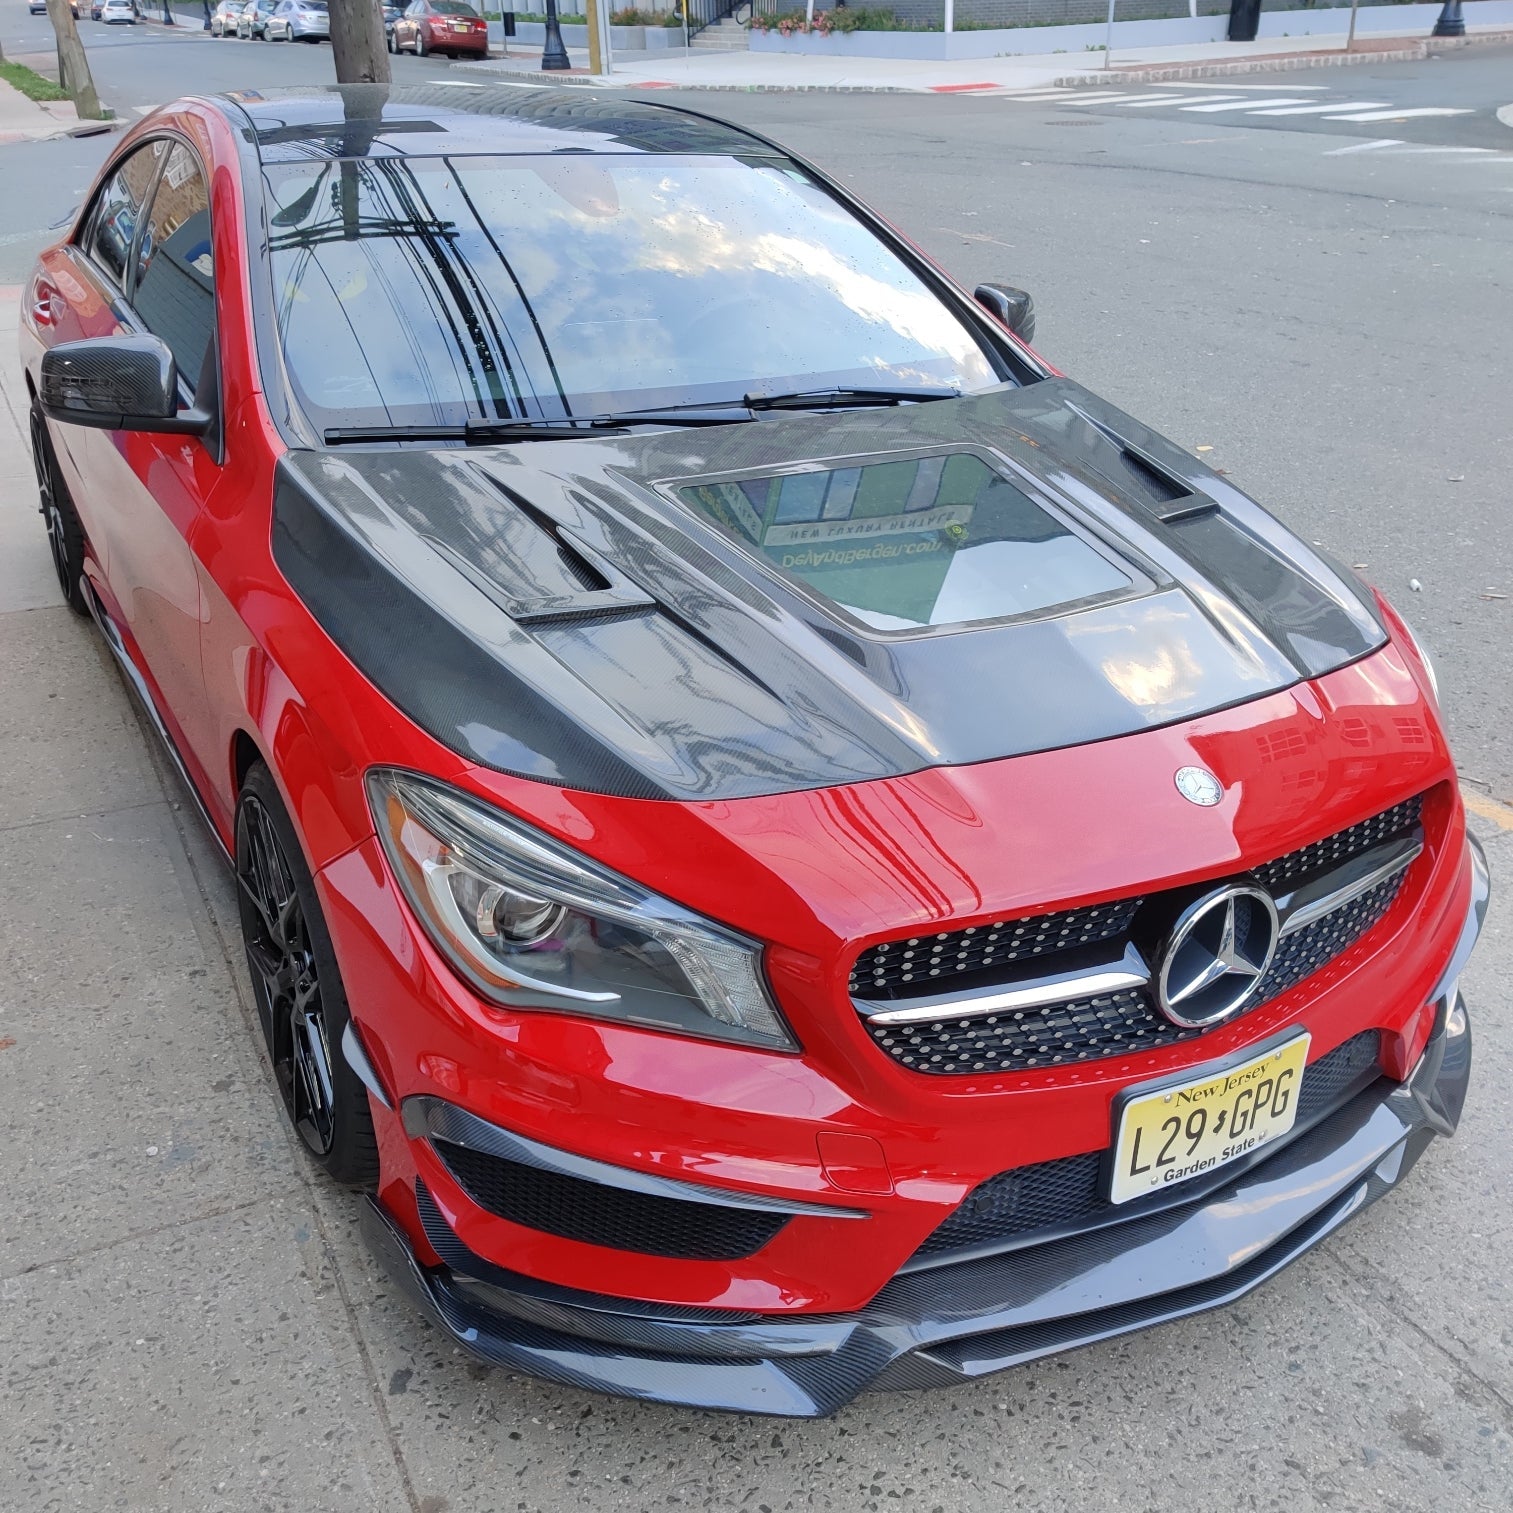 Aero Republic Tempered Glass Hood Bonnet Clearview for Mercedes benz C117 2014-2019 CLA250 CLA45 AMG-10